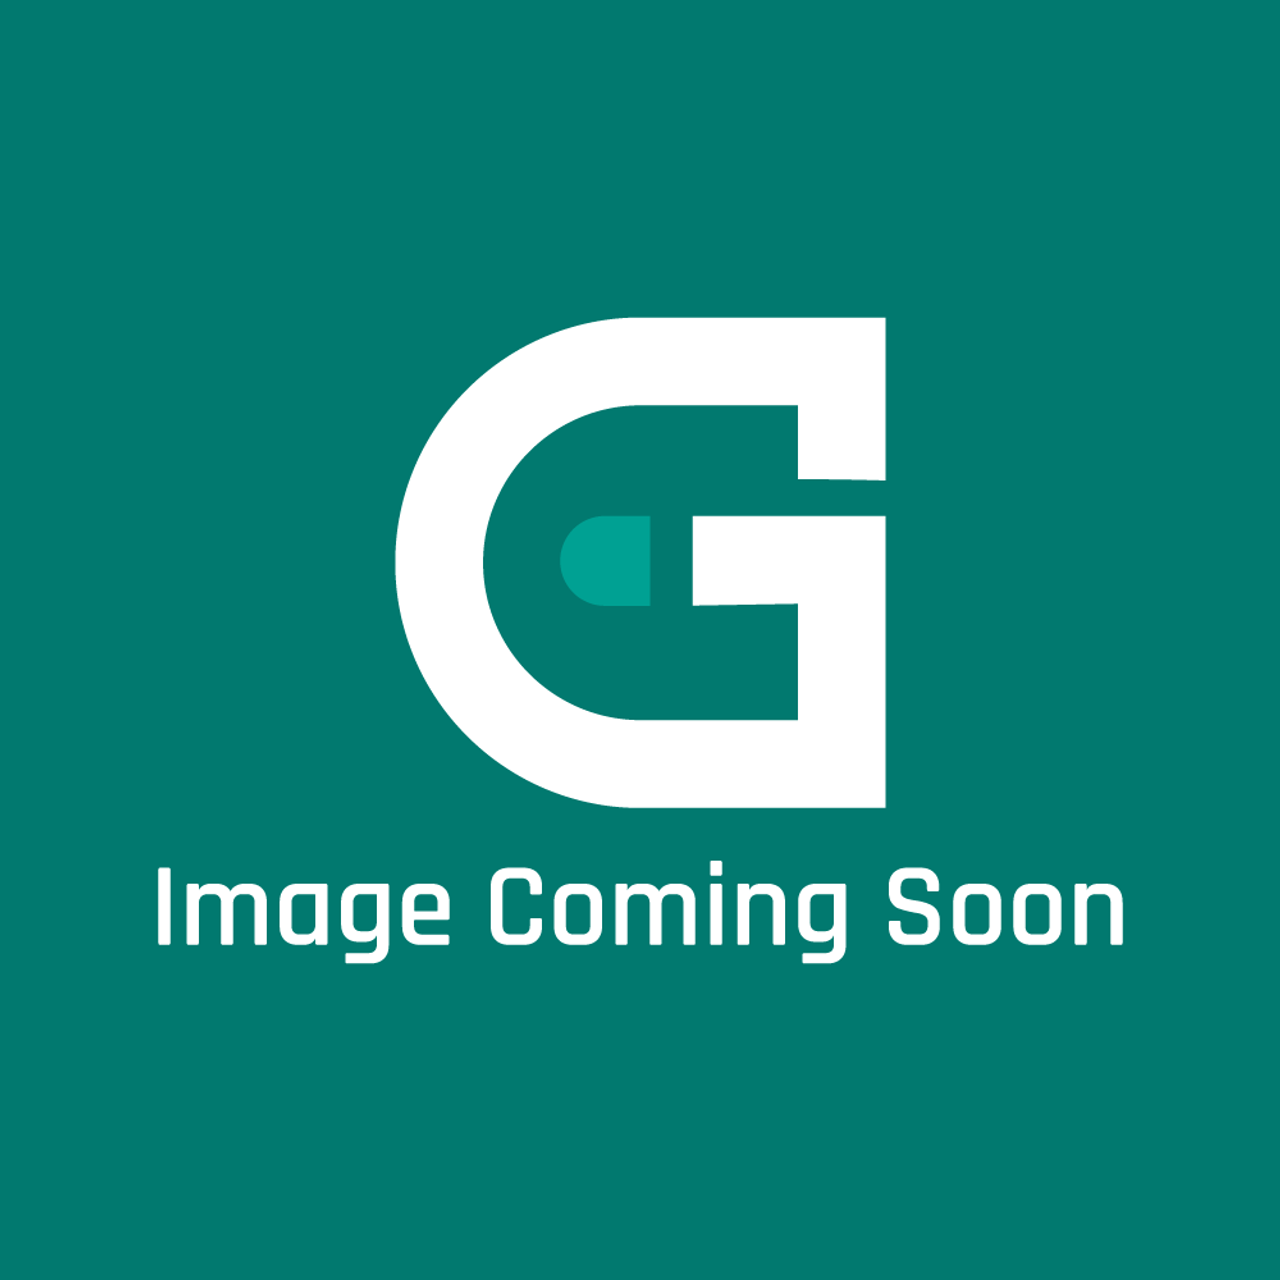 AGA Marvel AG5M210491 - Top Plate Baking Oven (81176) - Image Coming Soon!